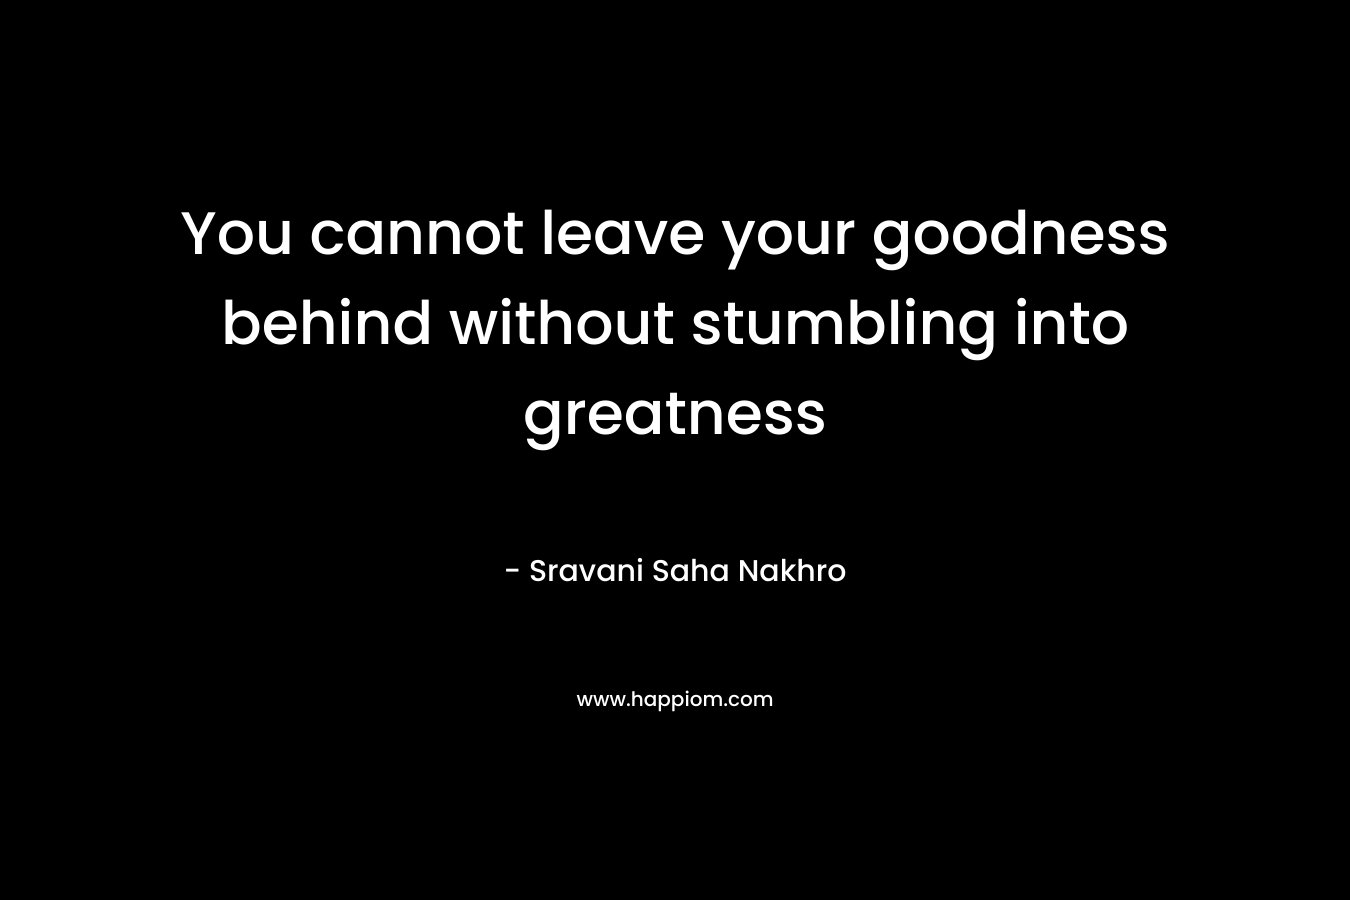 You cannot leave your goodness behind without stumbling into greatness